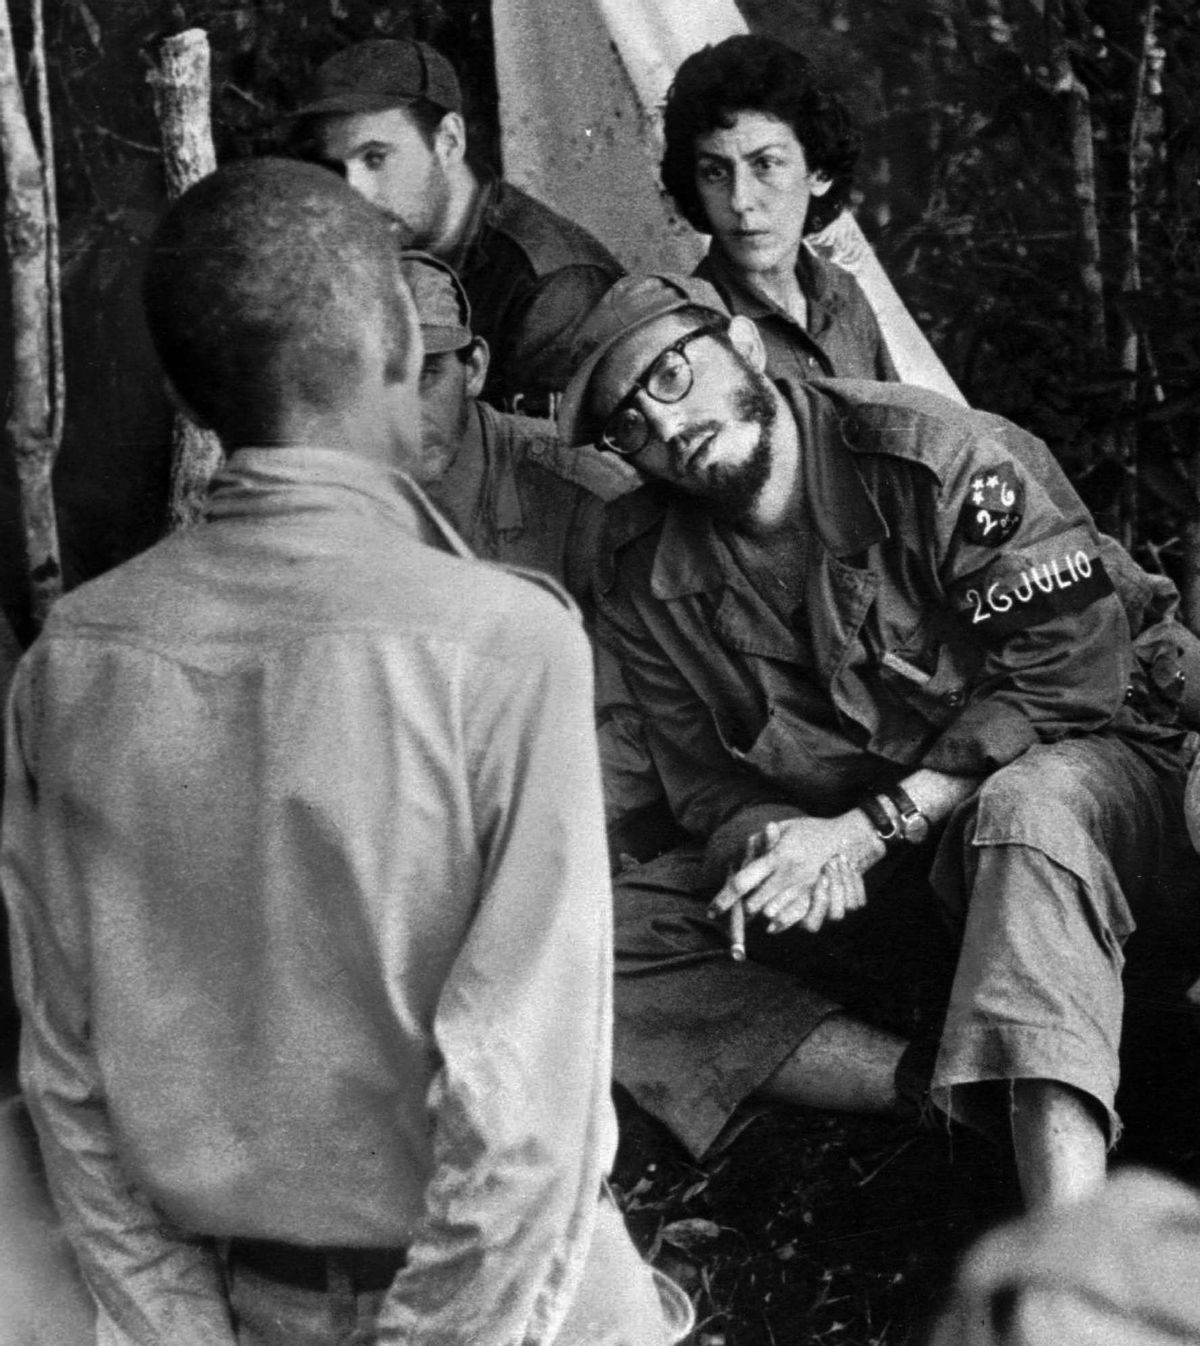 FILE - In this 1958 file photo, Cuba's leader Fidel Castro, center, questions a man charged with banditry as Celia Sanchez looks on during a trial held in the guerrillas' base in the Cuban mountain range of Sierra Maestra.  (AP)